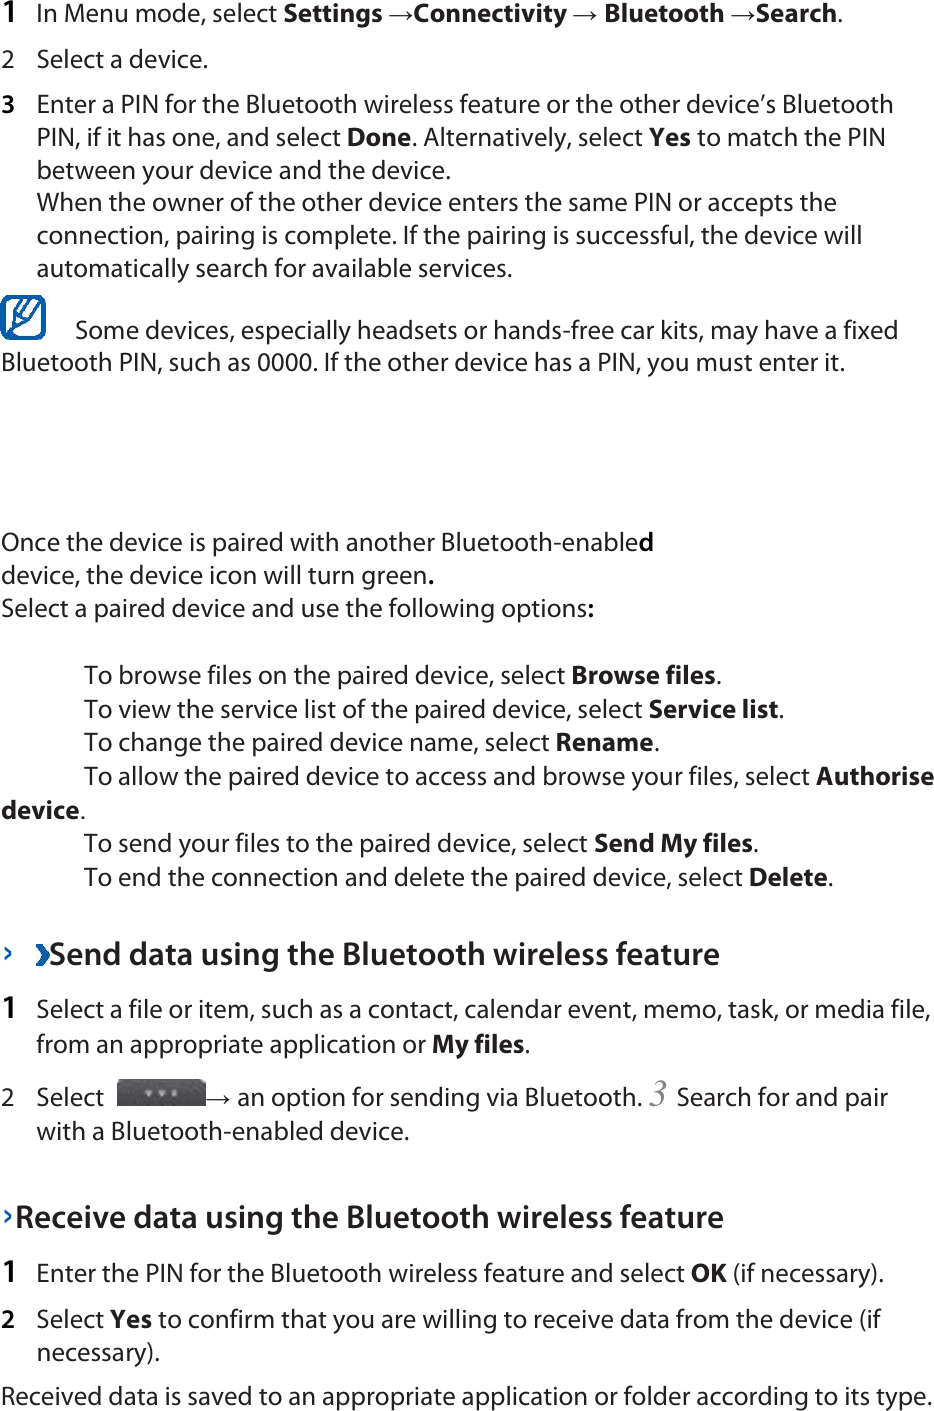 1  In Menu mode, select Settings →Connectivity → Bluetooth →Search.   2  Select a device.   3  Enter a PIN for the Bluetooth wireless feature or the other device’s Bluetooth PIN, if it has one, and select Done. Alternatively, select Yes to match the PIN between your device and the device.   When the owner of the other device enters the same PIN or accepts the connection, pairing is complete. If the pairing is successful, the device will automatically search for available services.    Some devices, especially headsets or hands-free car kits, may have a fixed Bluetooth PIN, such as 0000. If the other device has a PIN, you must enter it.   Once the device is paired with another Bluetooth-enabled device, the device icon will turn green. Select a paired device and use the following options:   To browse files on the paired device, select Browse files.    To view the service list of the paired device, select Service list.    To change the paired device name, select Rename.    To allow the paired device to access and browse your files, select Authorise device.    To send your files to the paired device, select Send My files.    To end the connection and delete the paired device, select Delete.    ›  Send data using the Bluetooth wireless feature   1  Select a file or item, such as a contact, calendar event, memo, task, or media file, from an appropriate application or My files.   2  Select  → an option for sending via Bluetooth. 3 Search for and pair with a Bluetooth-enabled device.   ›Receive data using the Bluetooth wireless feature   1  Enter the PIN for the Bluetooth wireless feature and select OK (if necessary).   2  Select Yes to confirm that you are willing to receive data from the device (if necessary).   Received data is saved to an appropriate application or folder according to its type. 